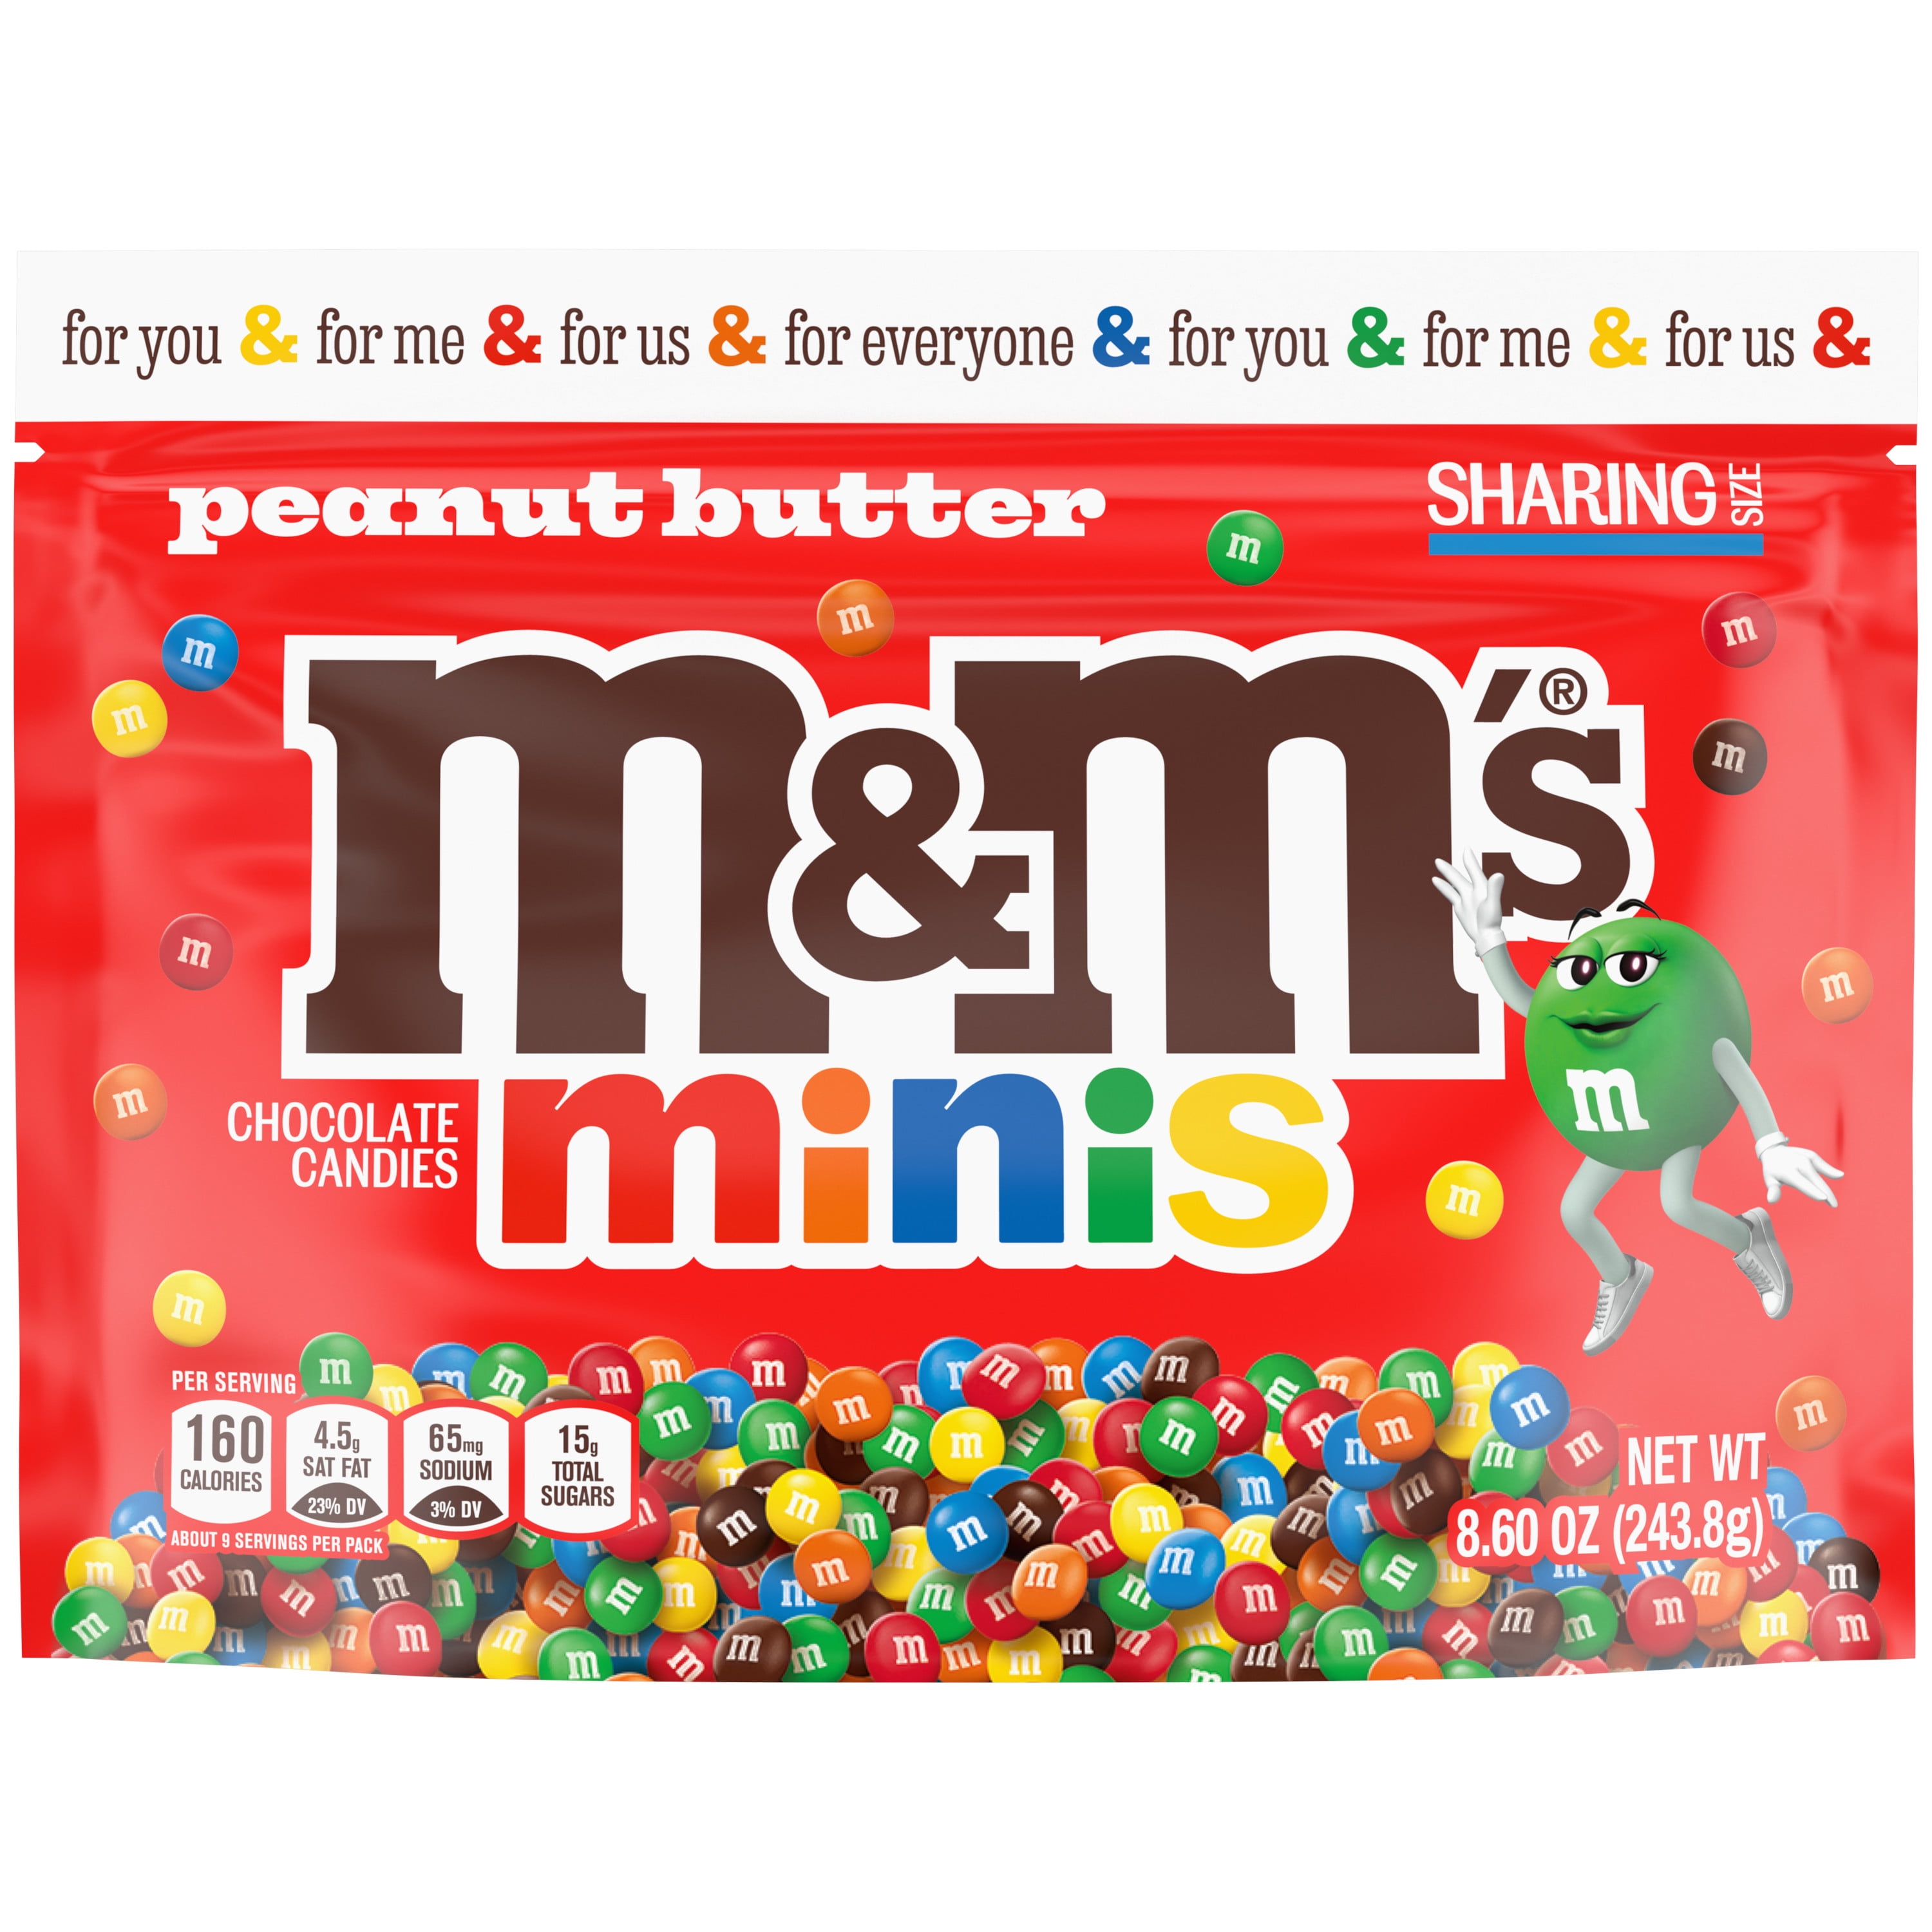 M&M'S Peanut Butter Chocolate Candy Sharing Size 9.6-Ounce Bag (Pack of 8)